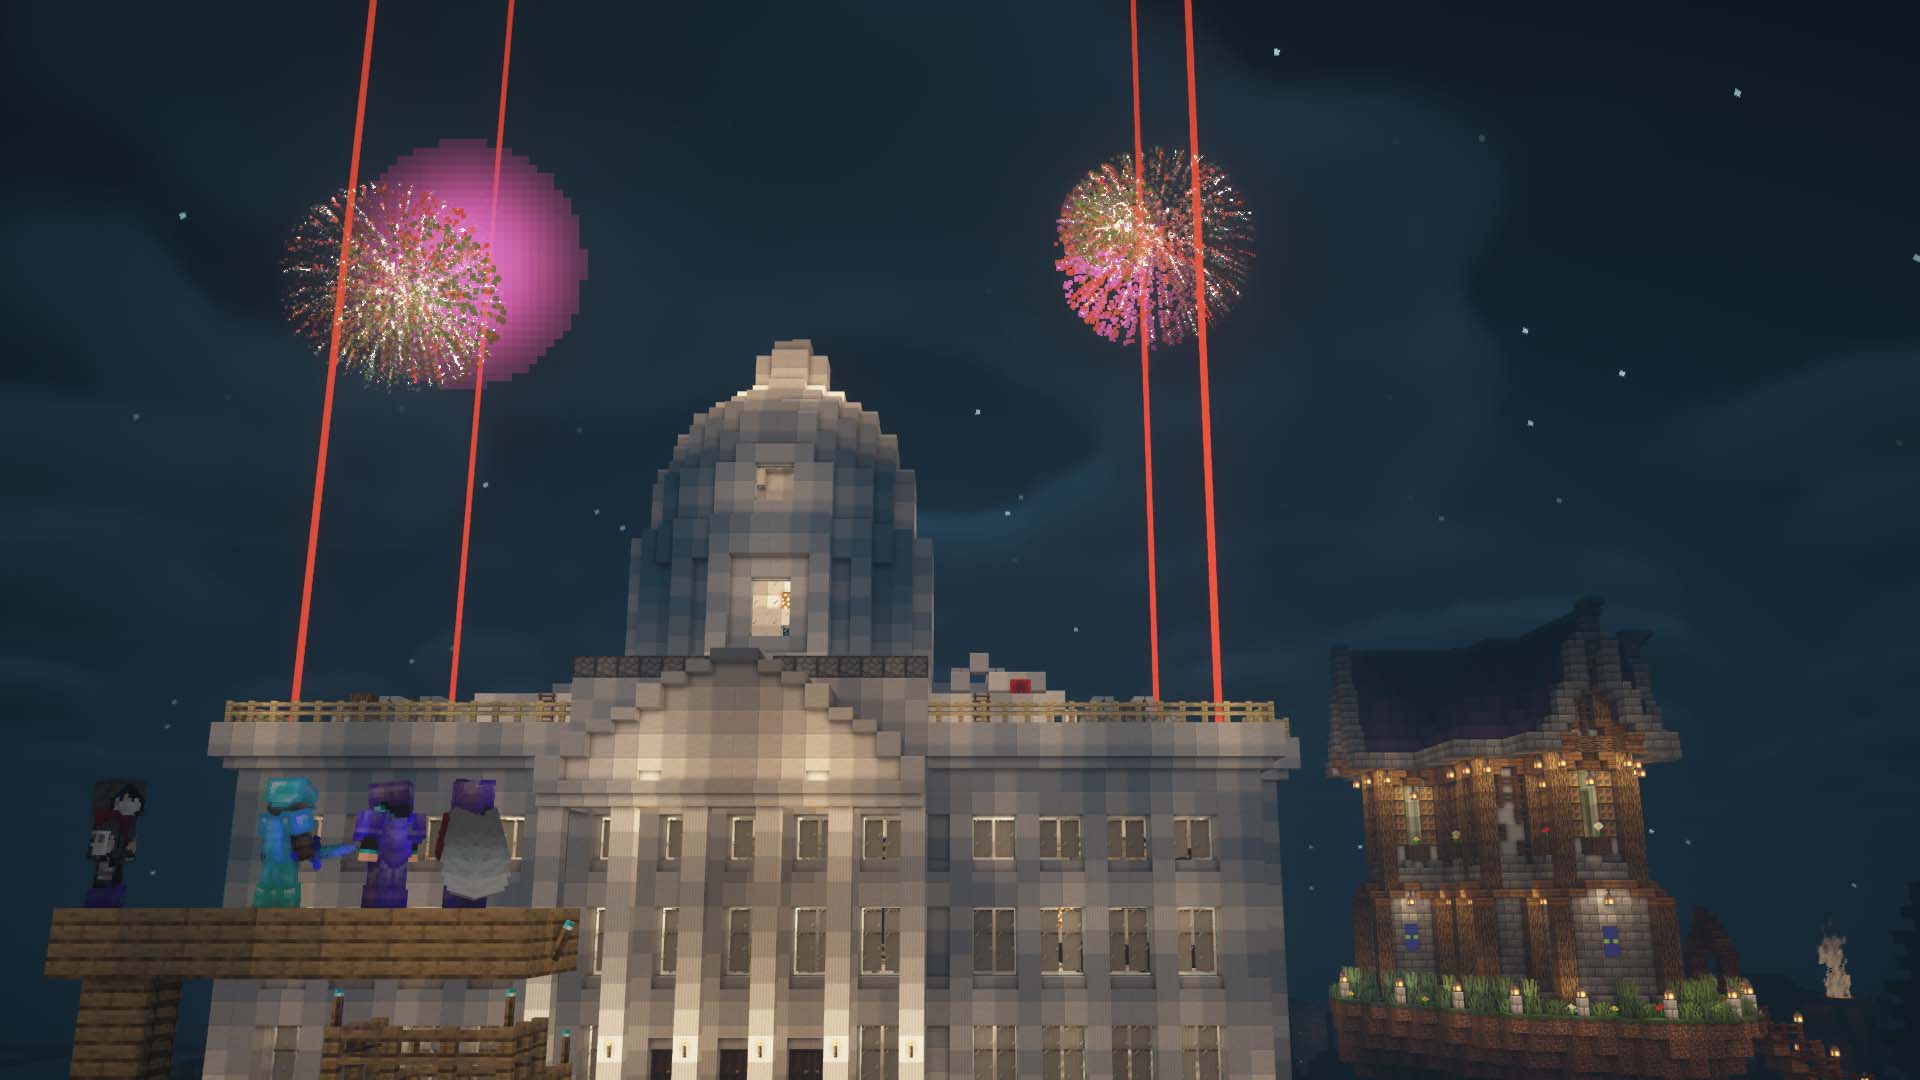 The Utah state capital made in Minecraft with fireworks symbolizing launch day.